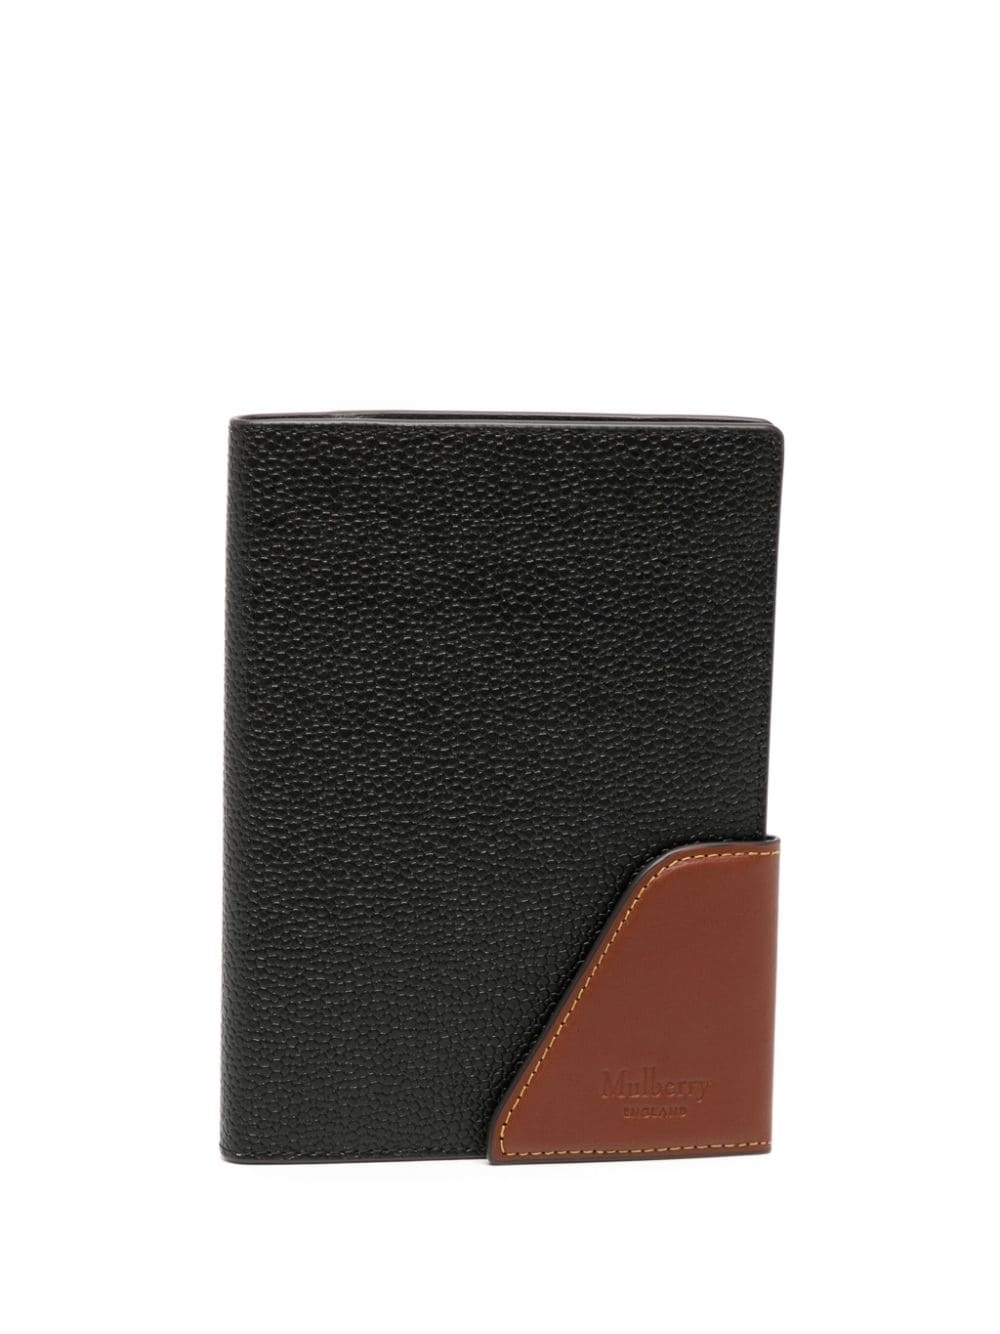 Heritage Travel leather wallet - 1